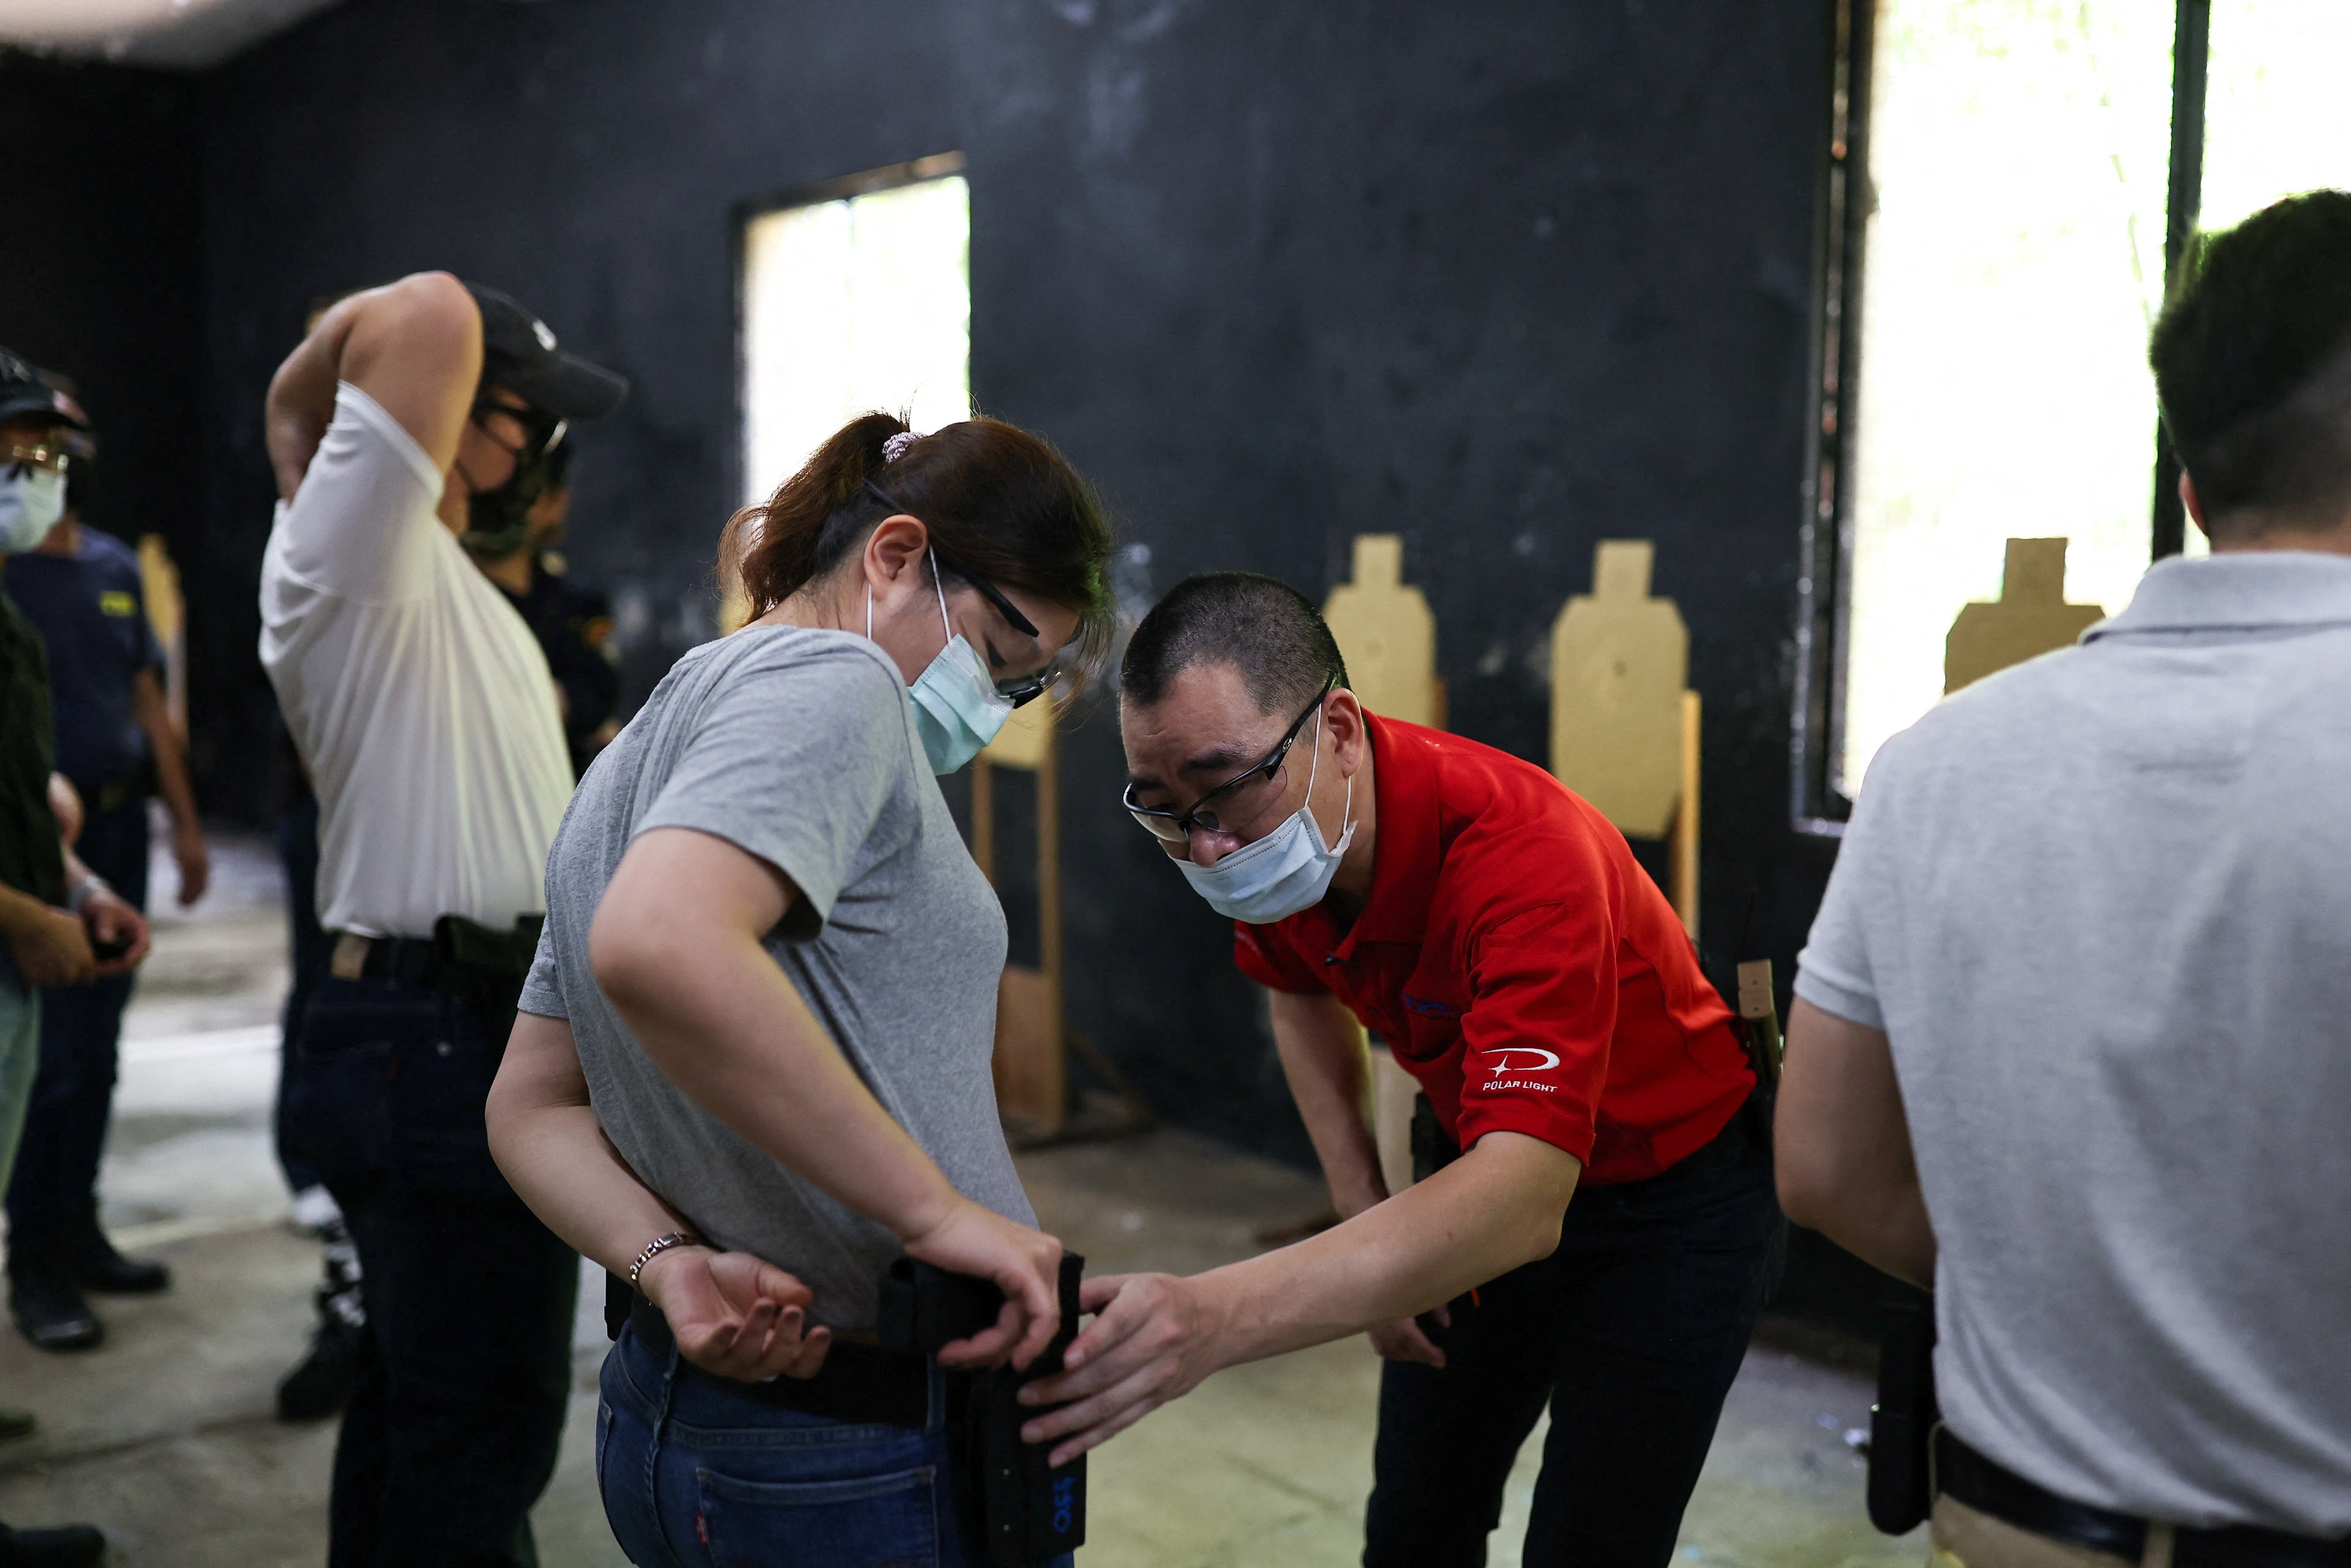 A trainer checks if a female trainee’s airsoft handgun is placed correctly in the holster during a basic training class